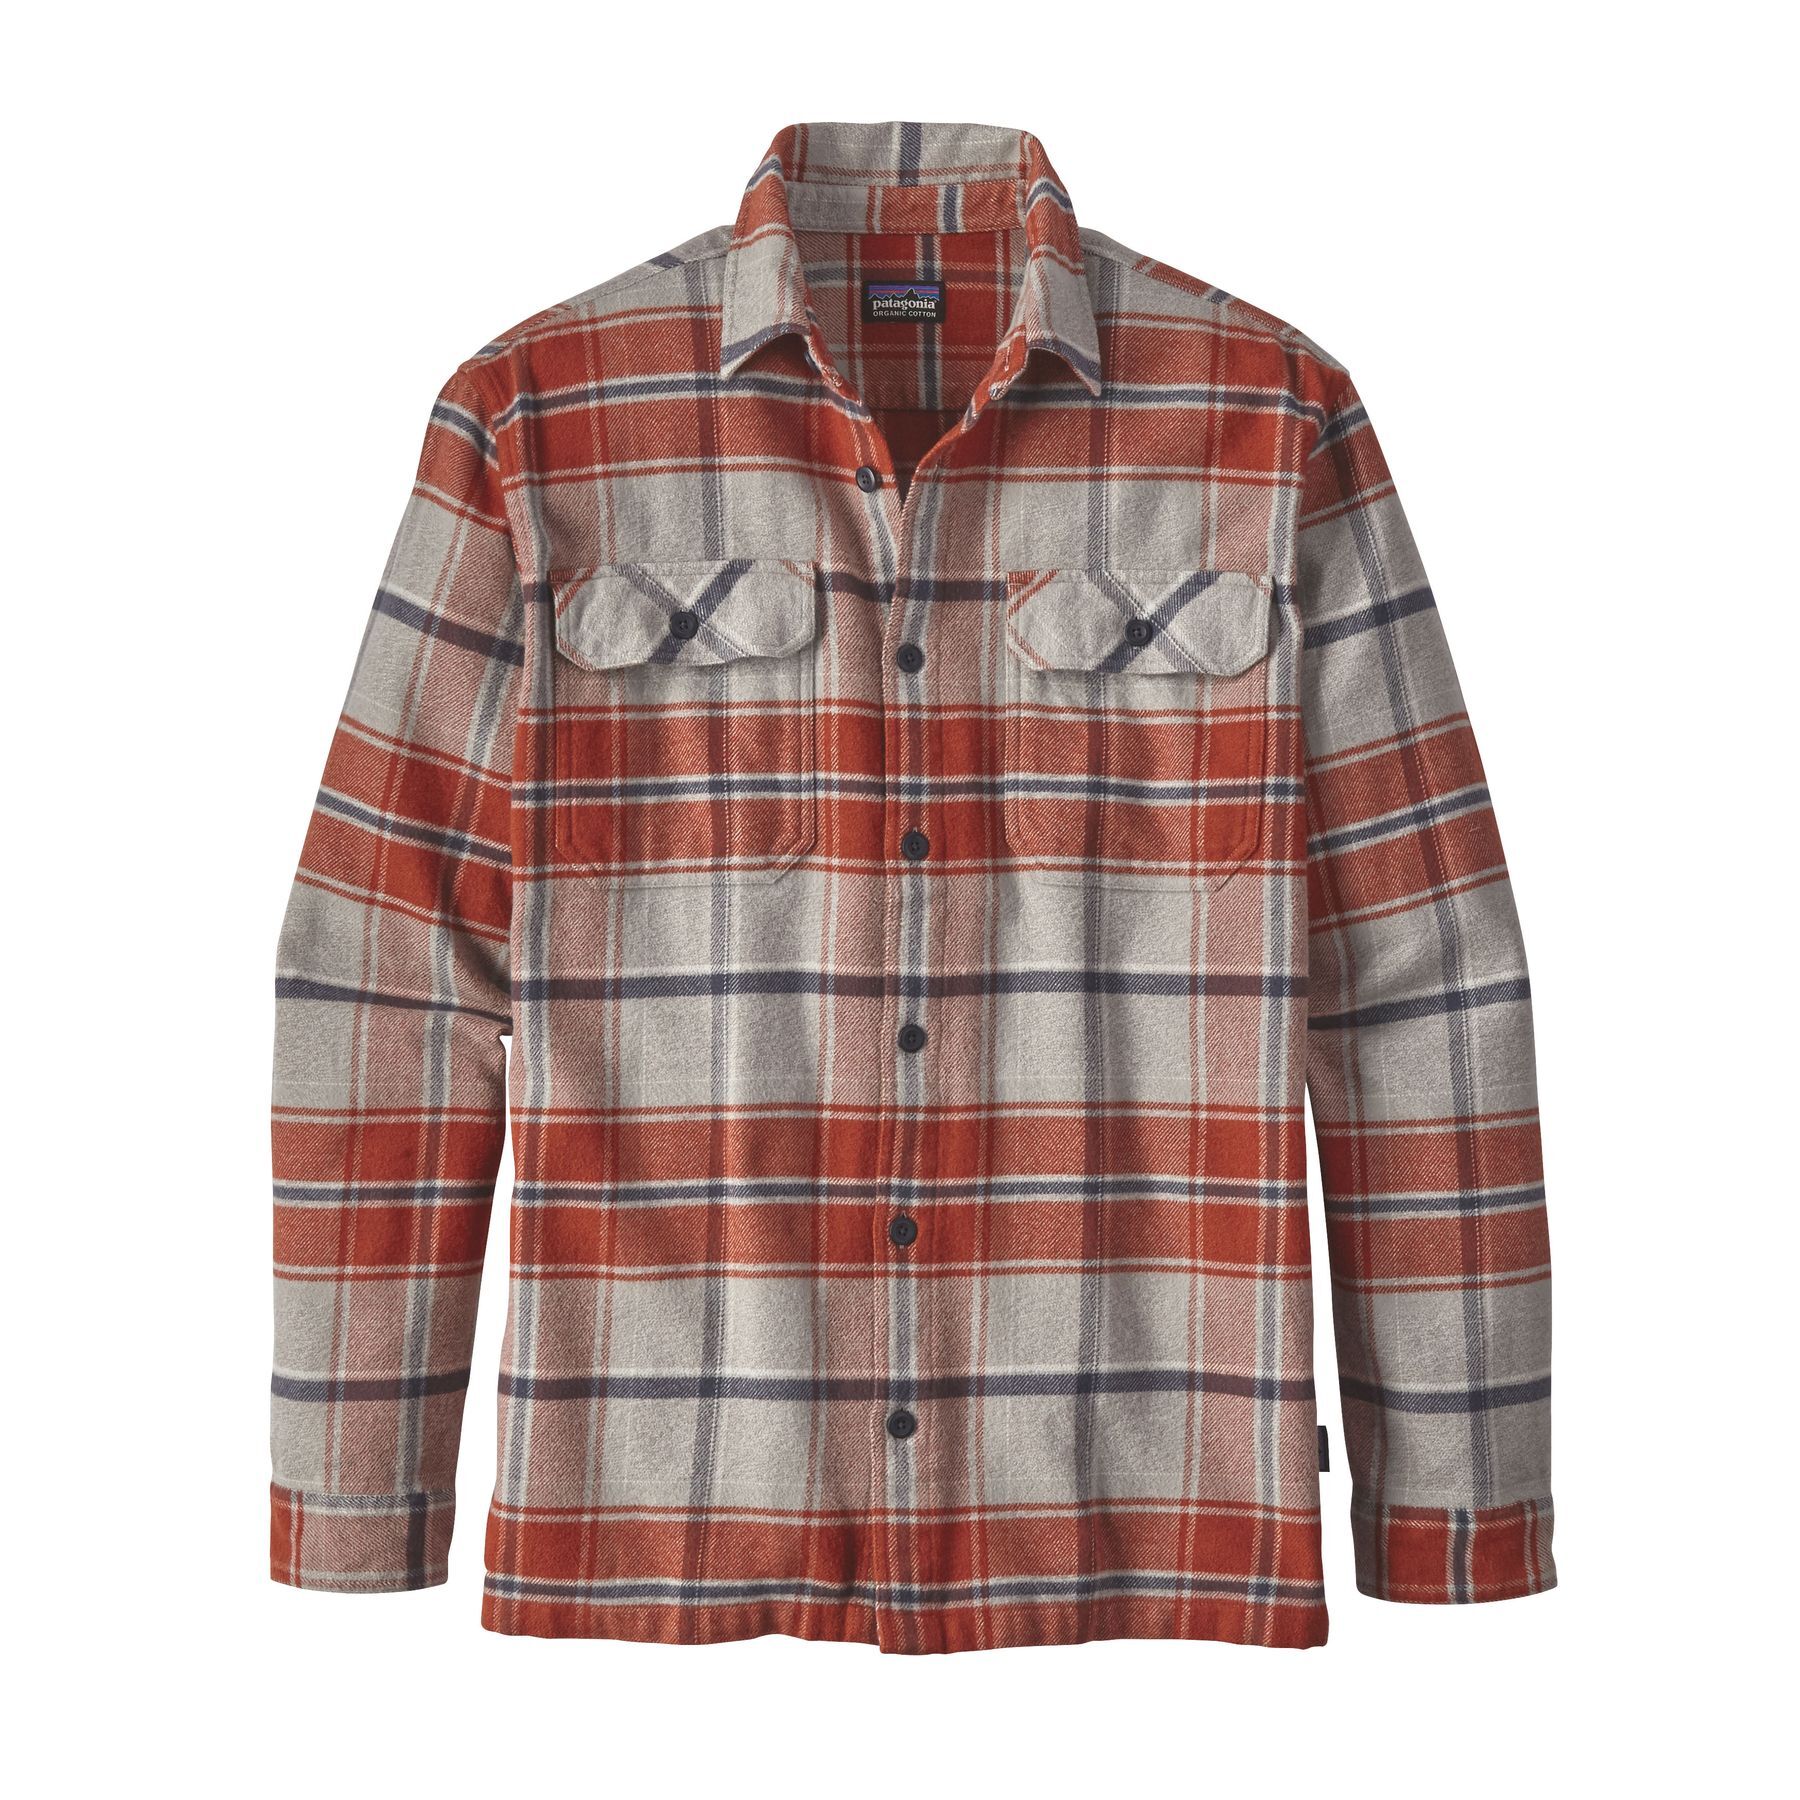 Patagonia - Long-Sleeved Fjord Flannel Shirt - Camicia - Uomo